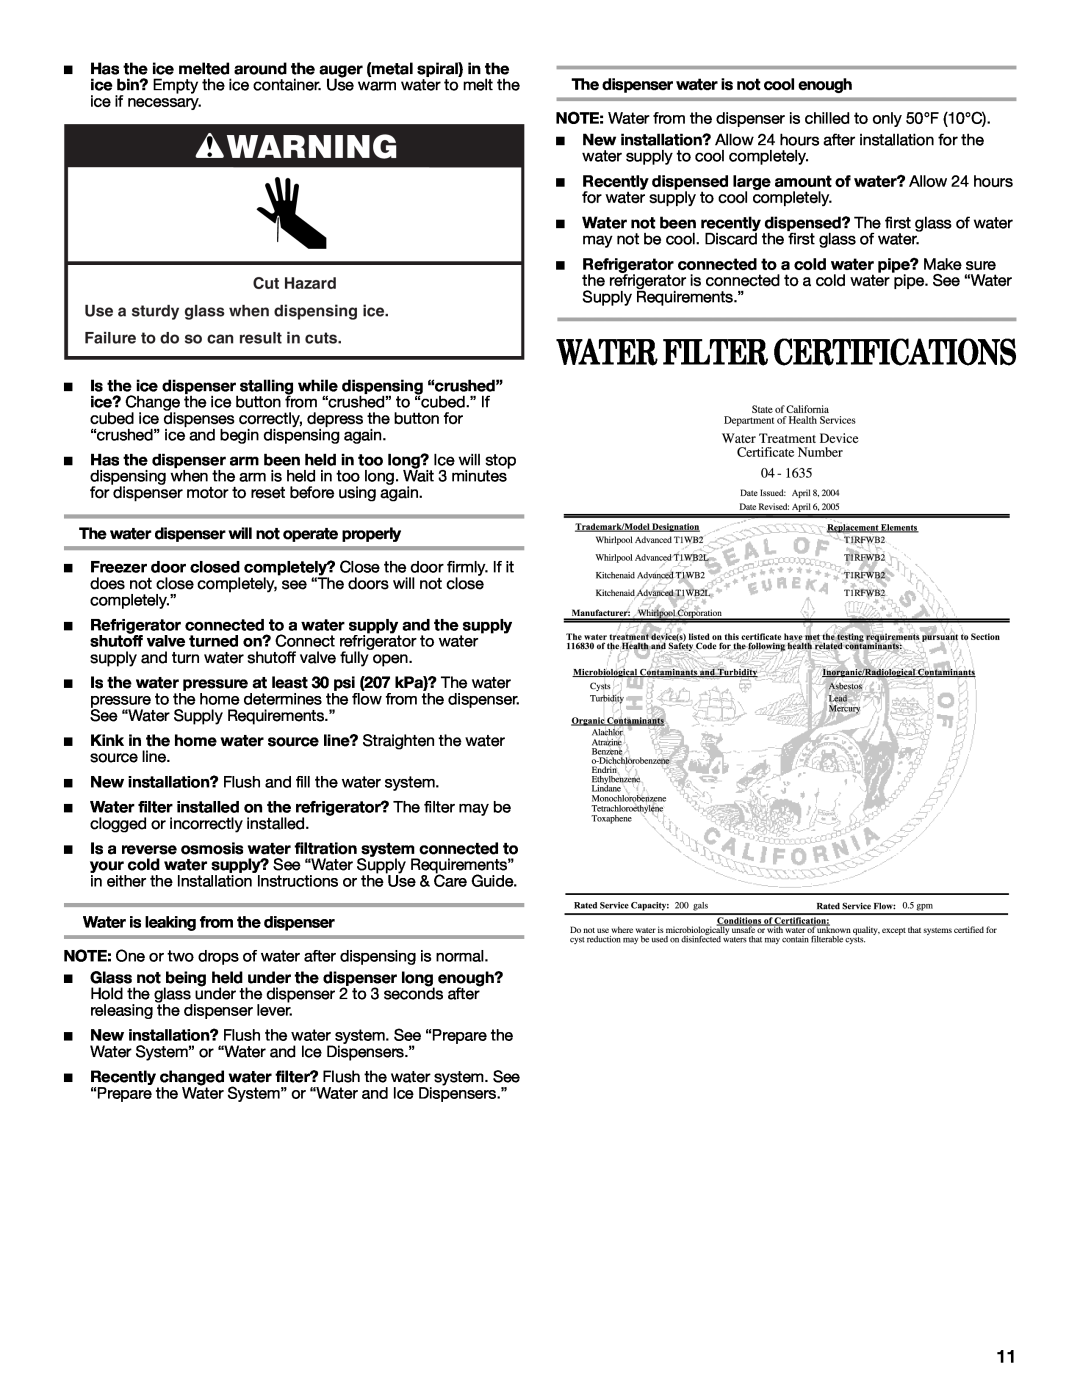 Whirlpool ES2FHAXSA00 warranty Water Filter Certifications, The water dispenser will not operate properly 